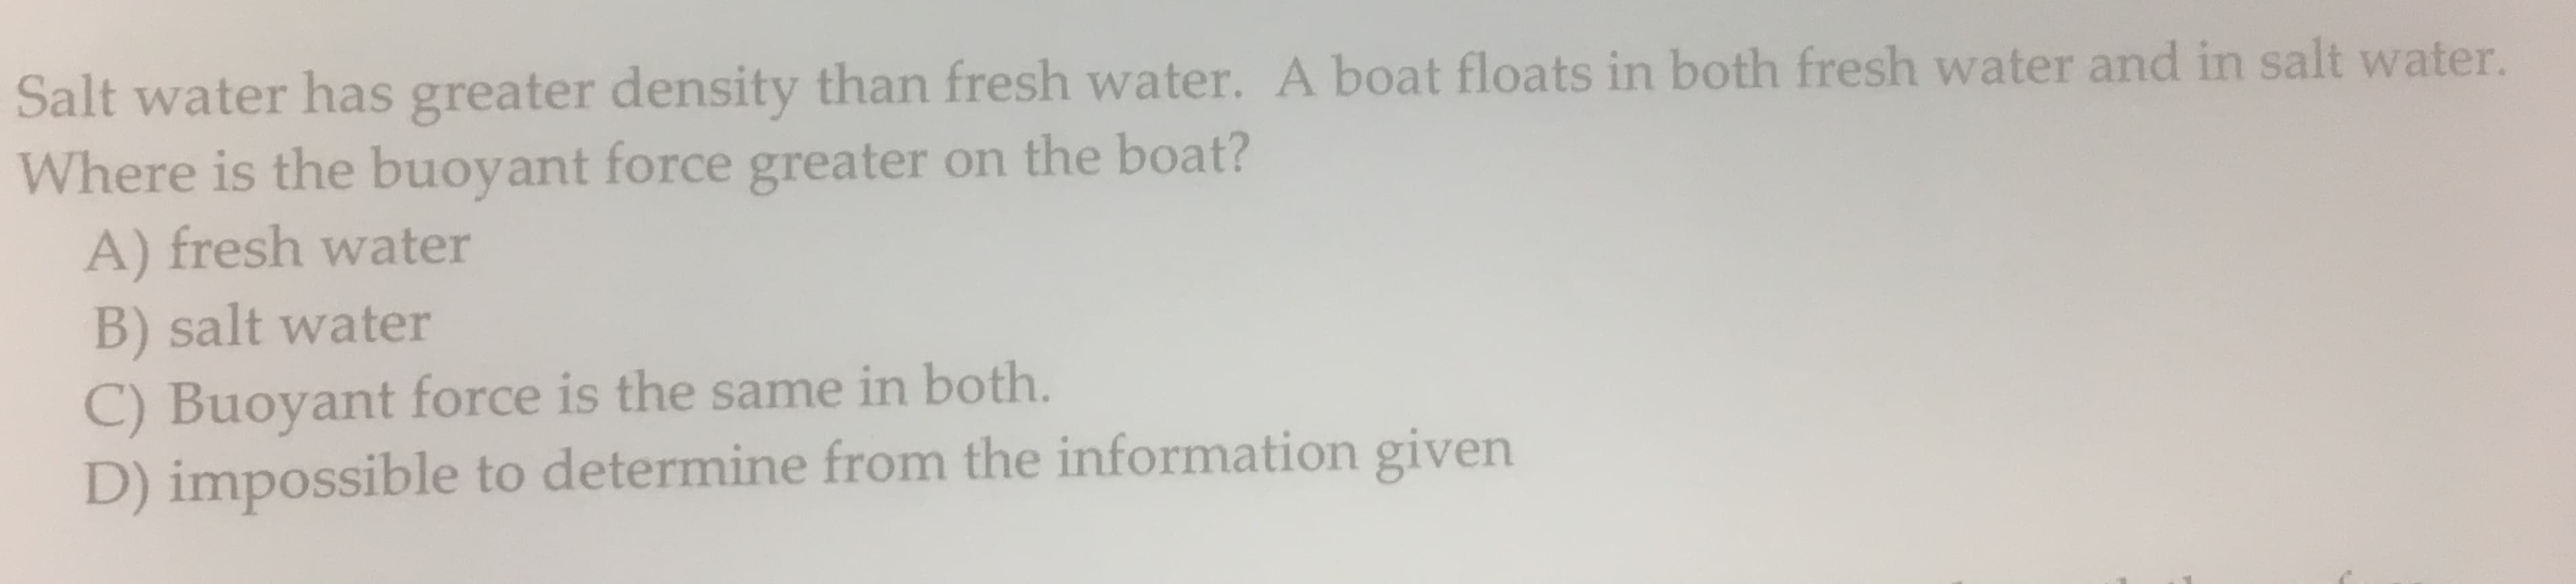 Salt water has greater density than fresh water. A boat floats in both fresh water and in salt water.
Where is the buoyant force greater on the boat?
A) fresh water
B) salt water
C) Buoyant force is the same in both.
D) impossible to determine from the information given
